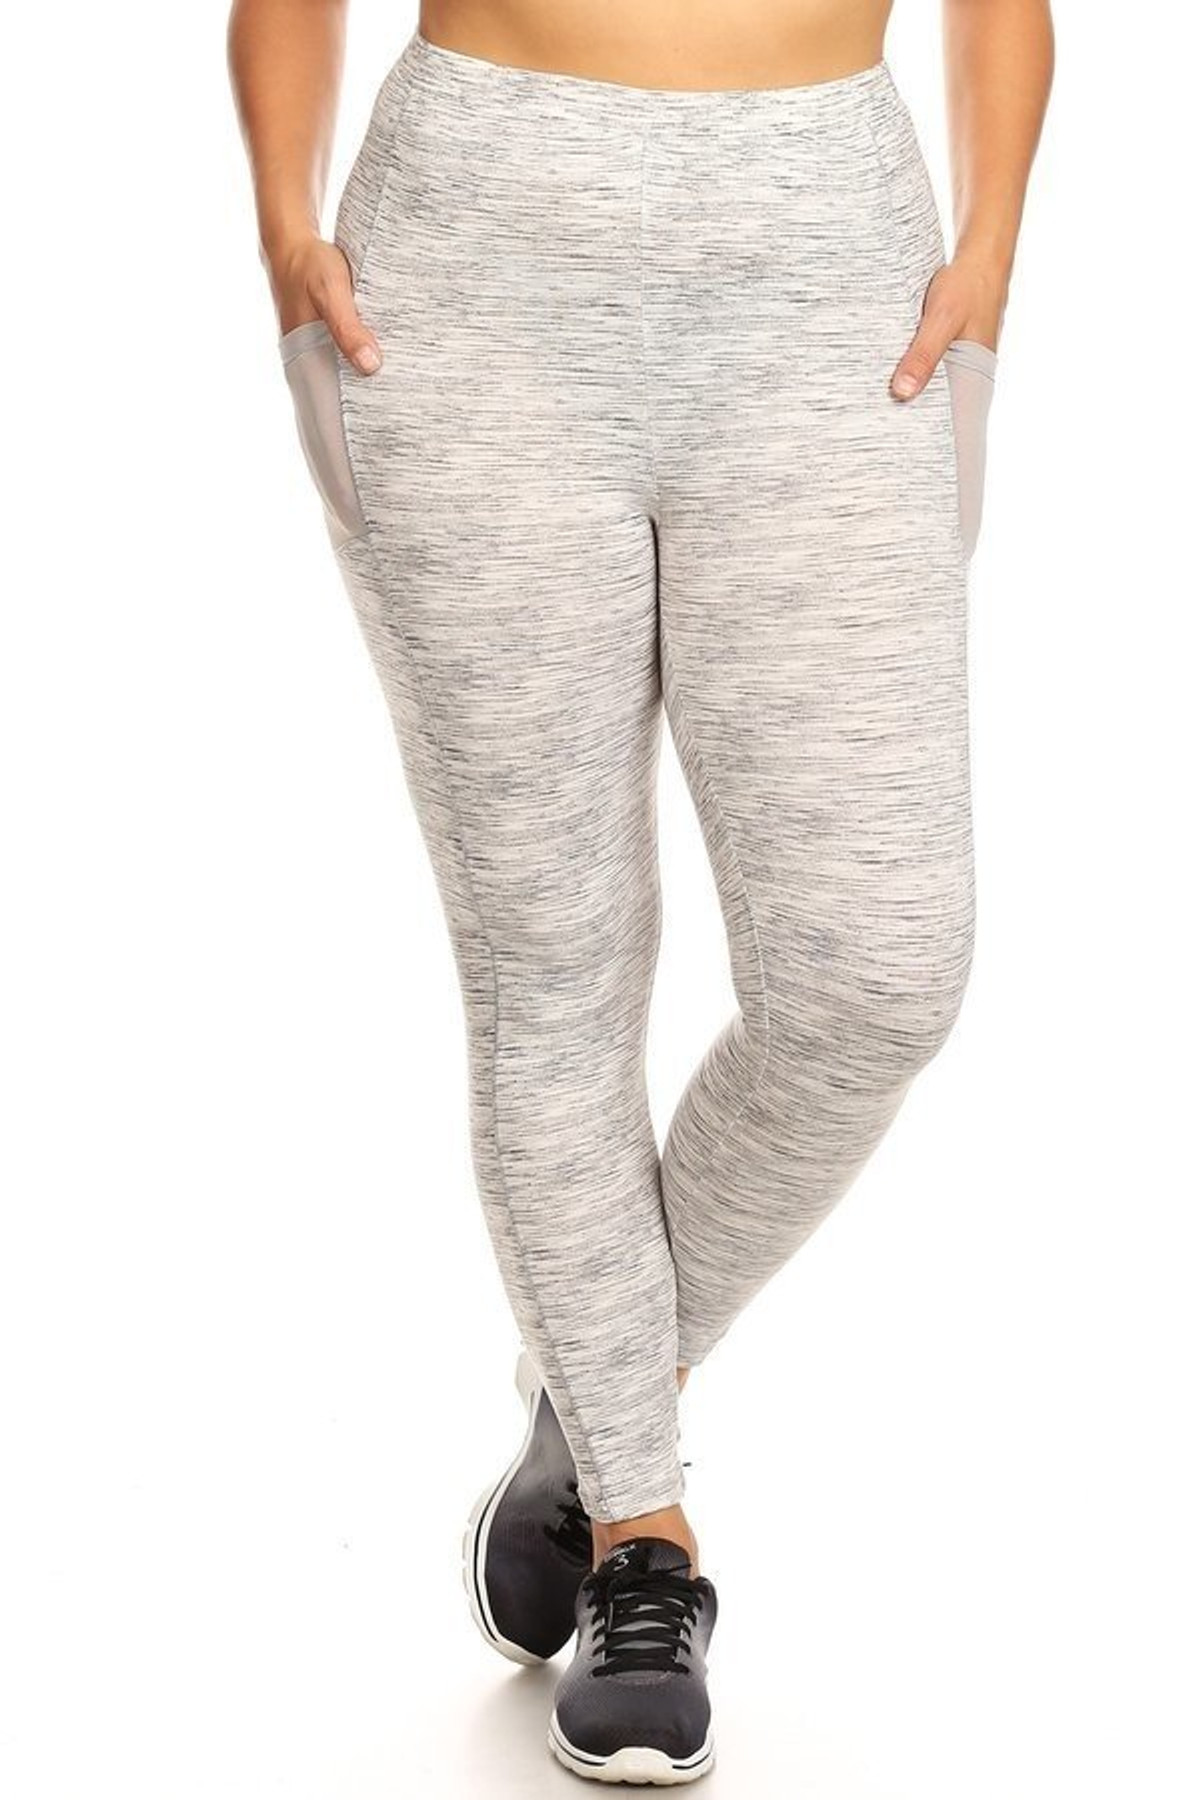 Buttery Soft Sport Basic Plus Size Leggings with Side Pockets ...